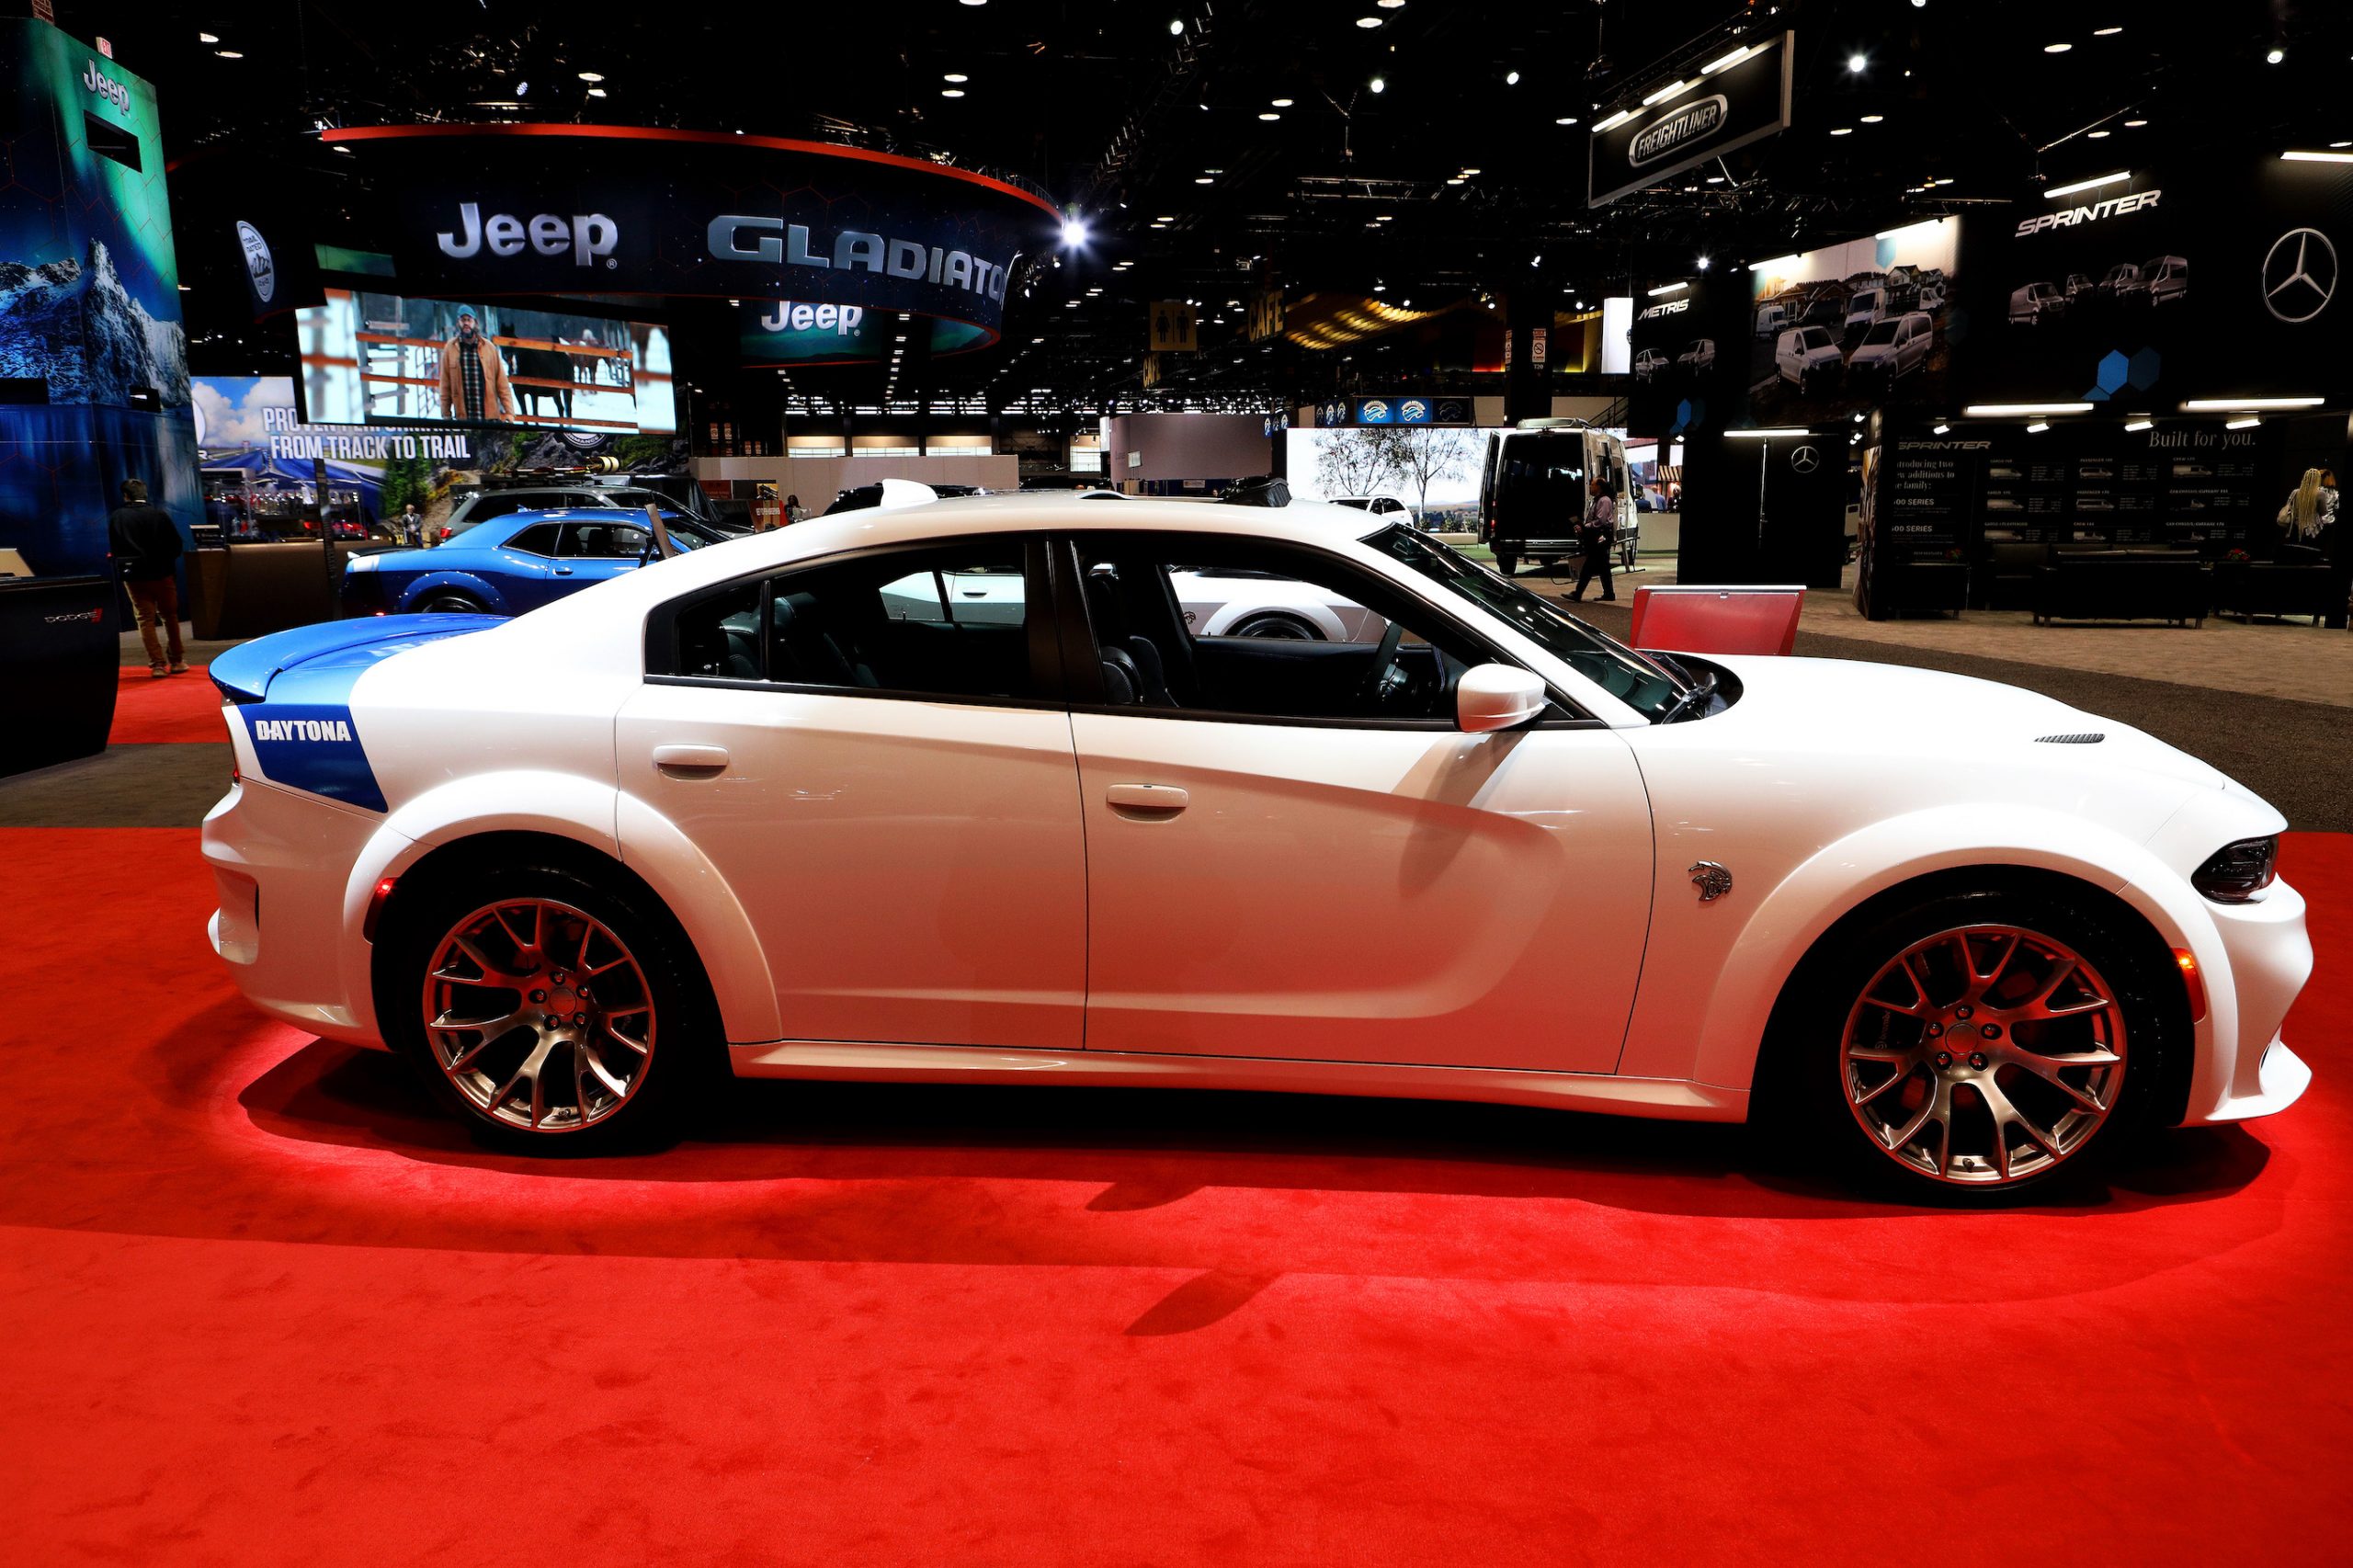 2020 Dodge Charger SRT Hellcat Widebody is on display at the 112th Annual Chicago Auto Show